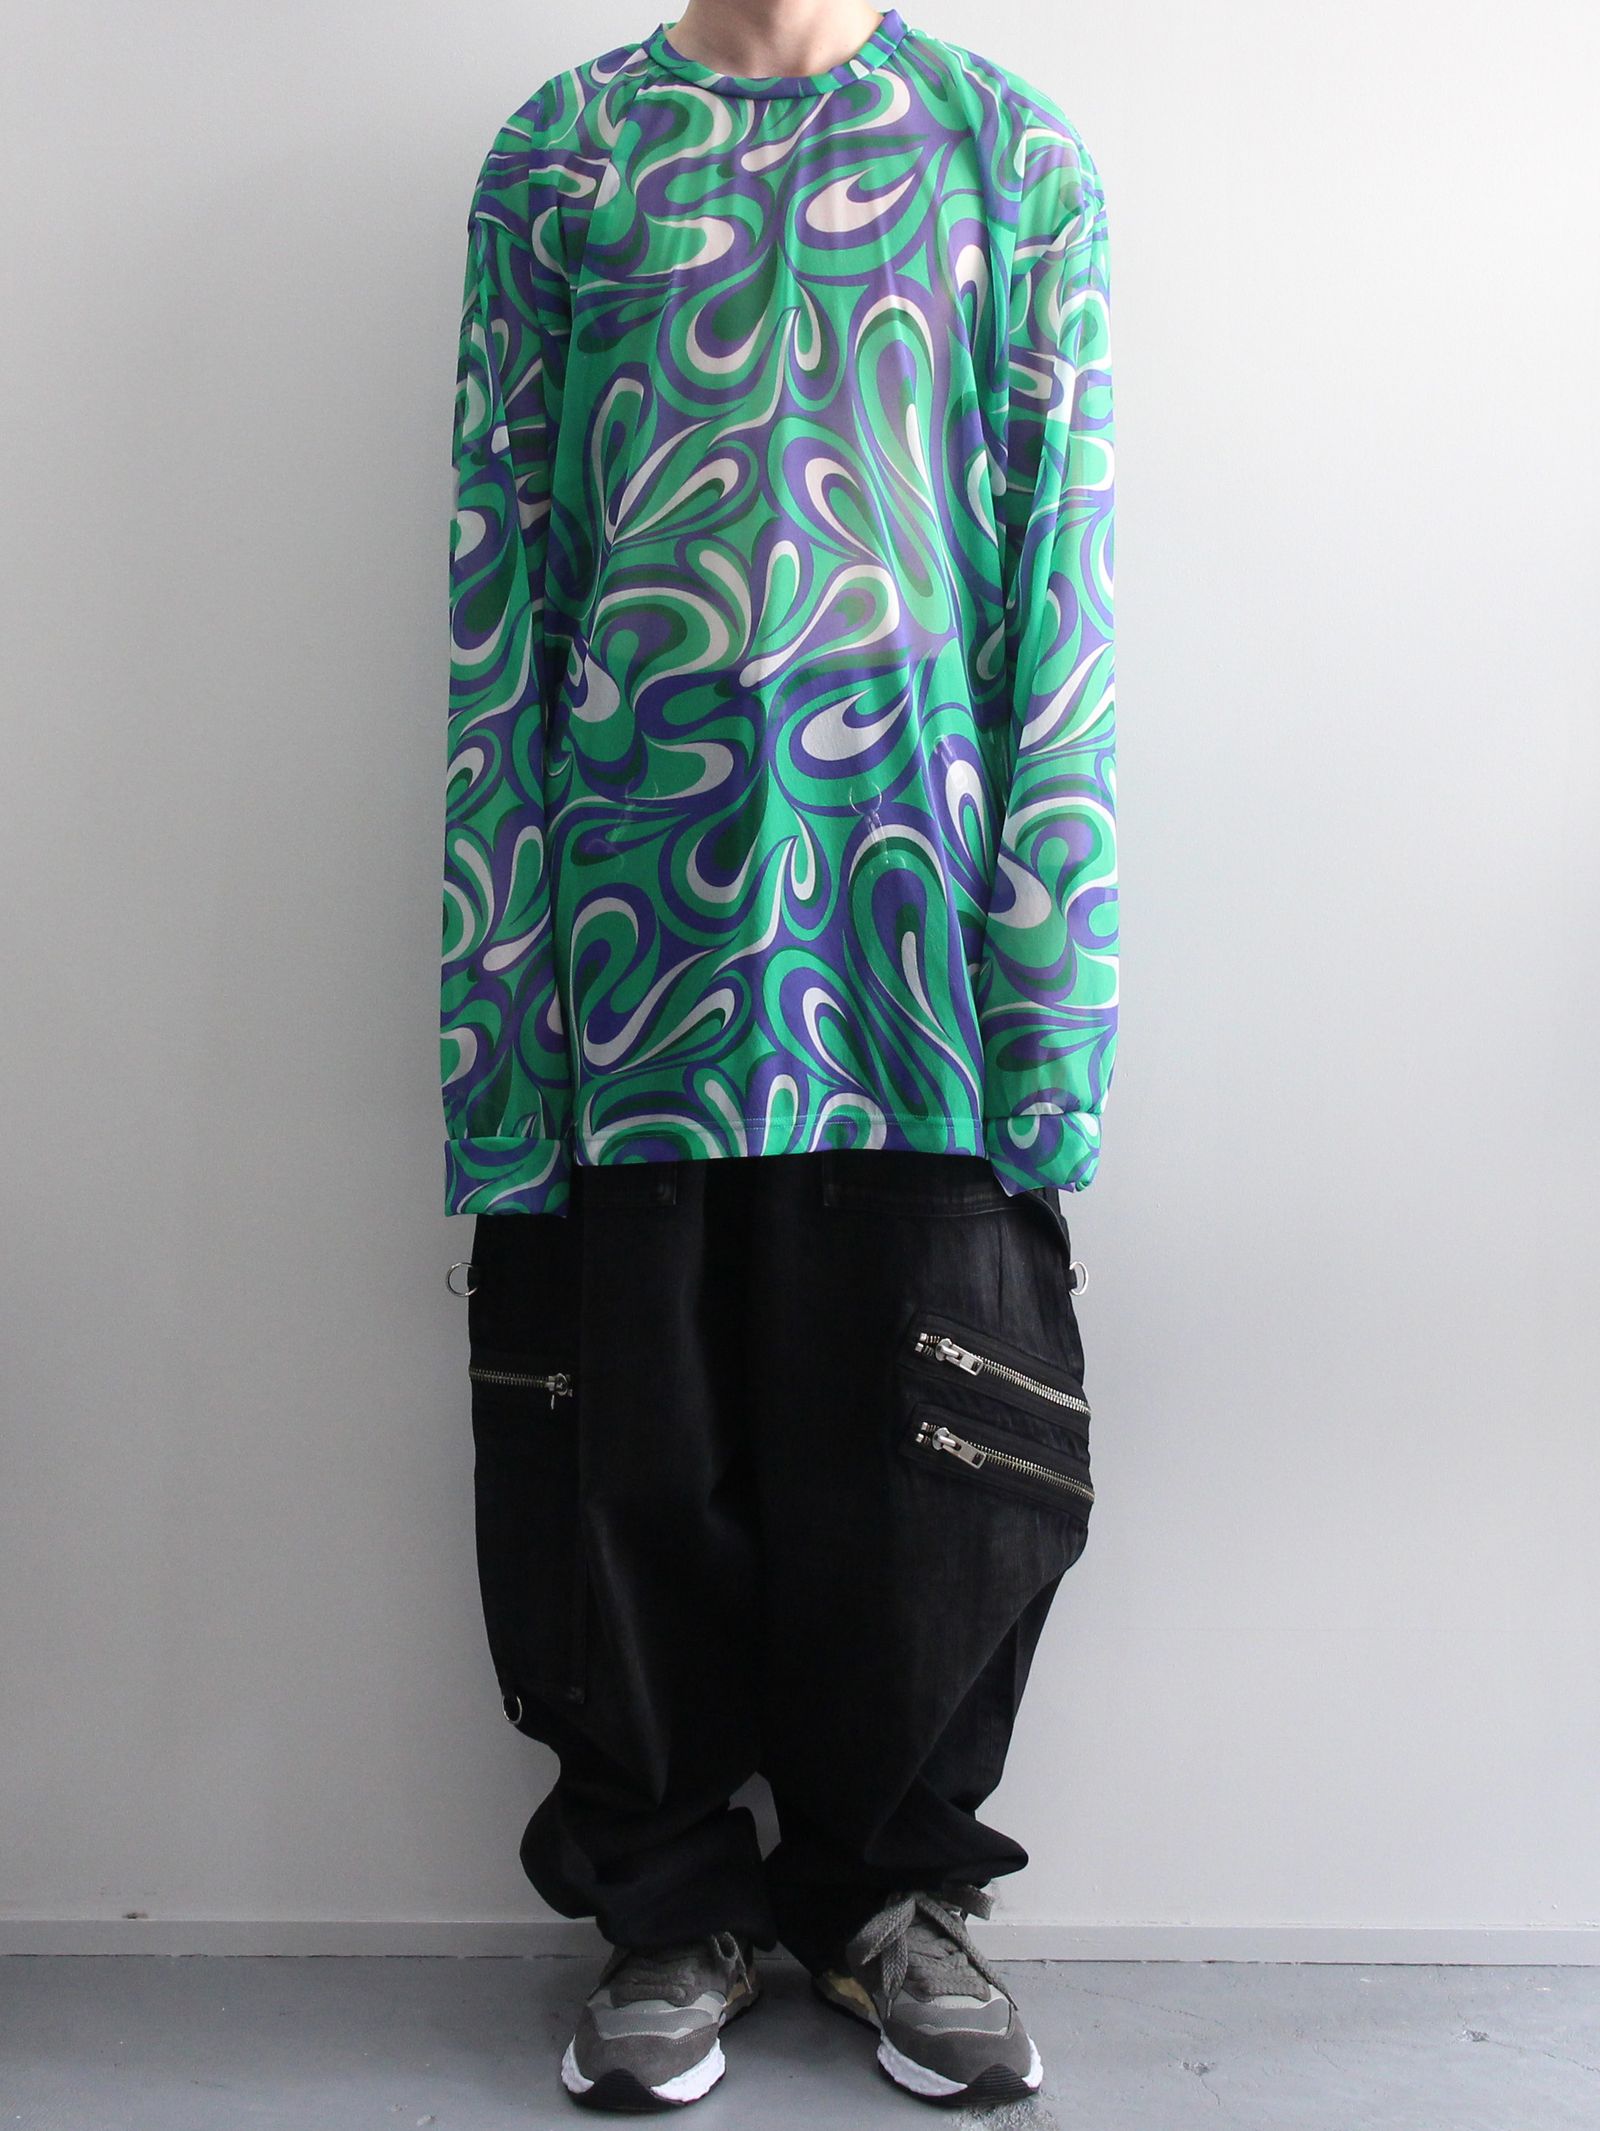 KIDILL - 総柄プリントカットソー - LONG SLEEVE POLY TEE - TEXTILE 